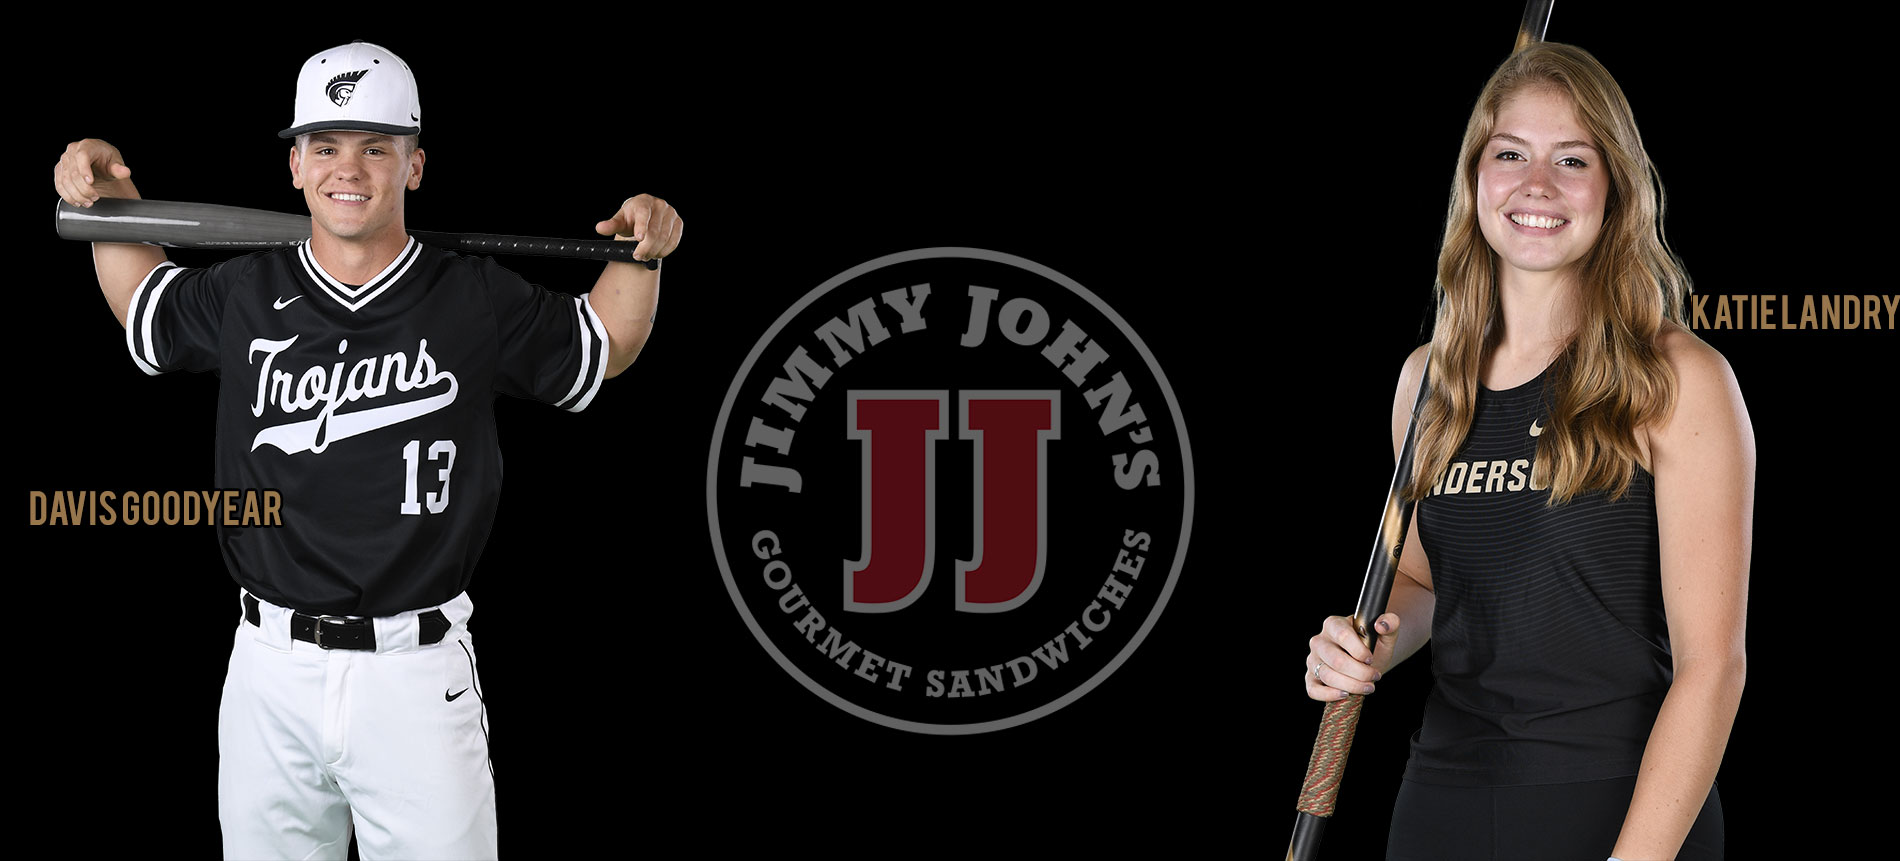 Katie Landry and Davis Goodyear Named Jimmy John’s Female and Male Athletes of the Week